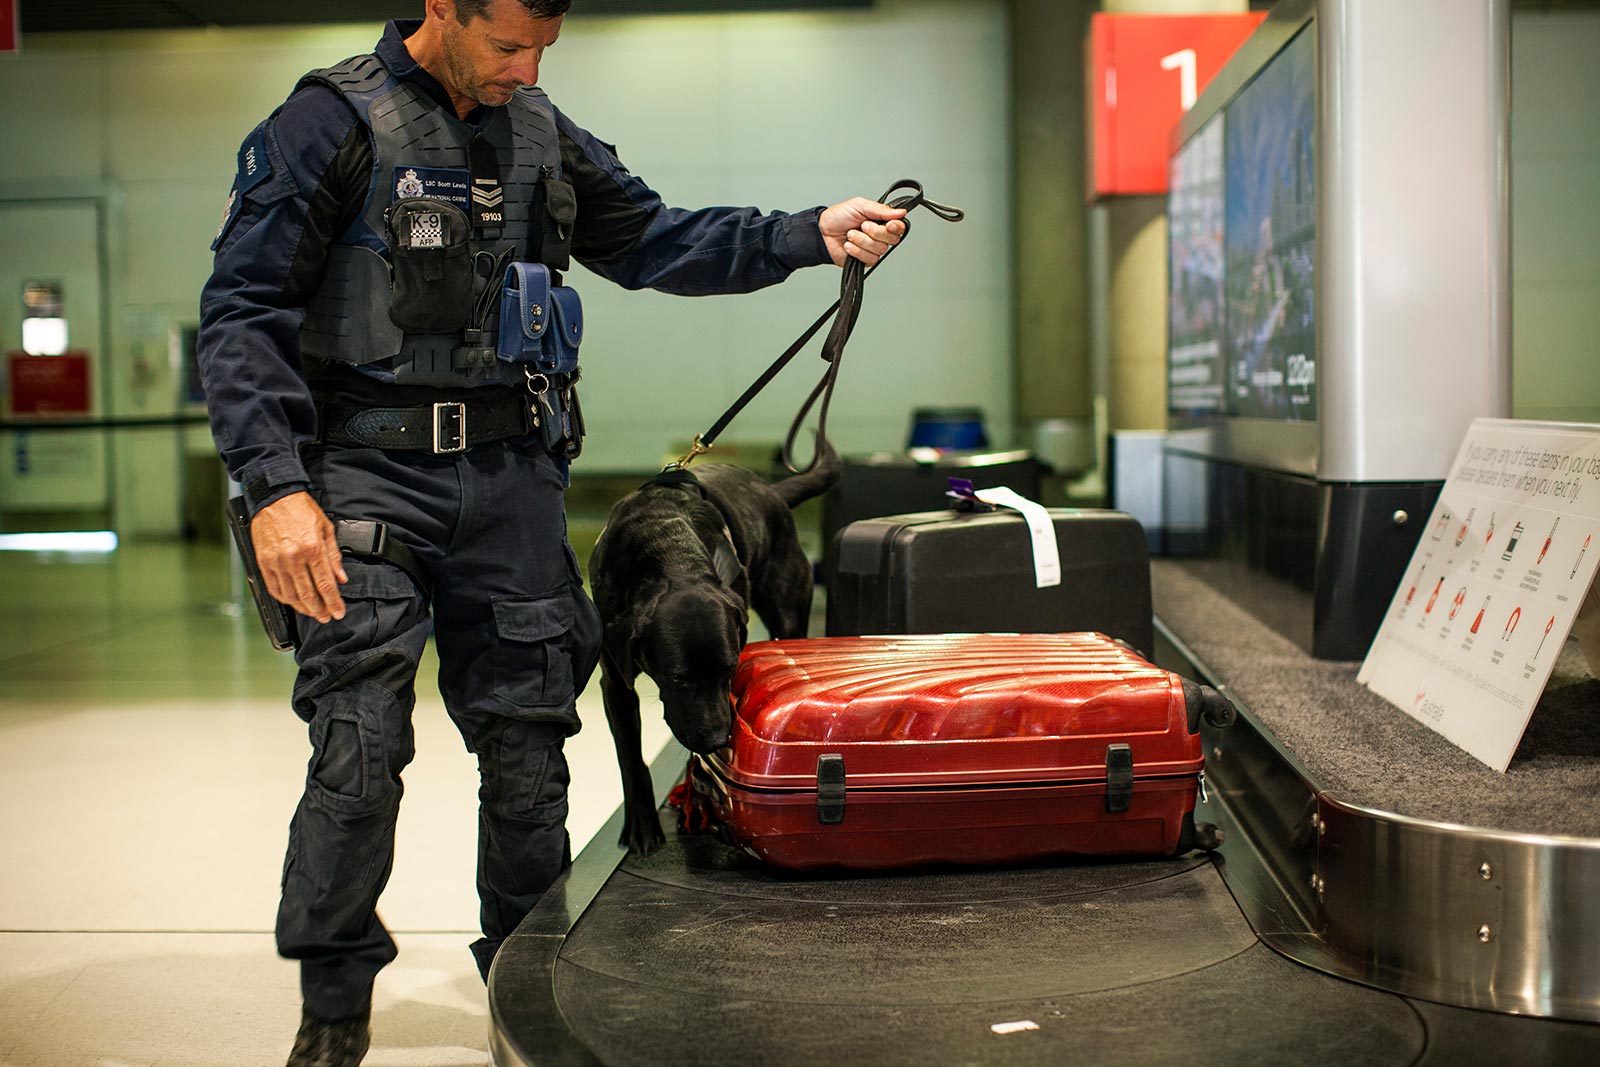 Naya is primarily involved in screening incoming and outgoing passengers, searching incoming baggage and cargo